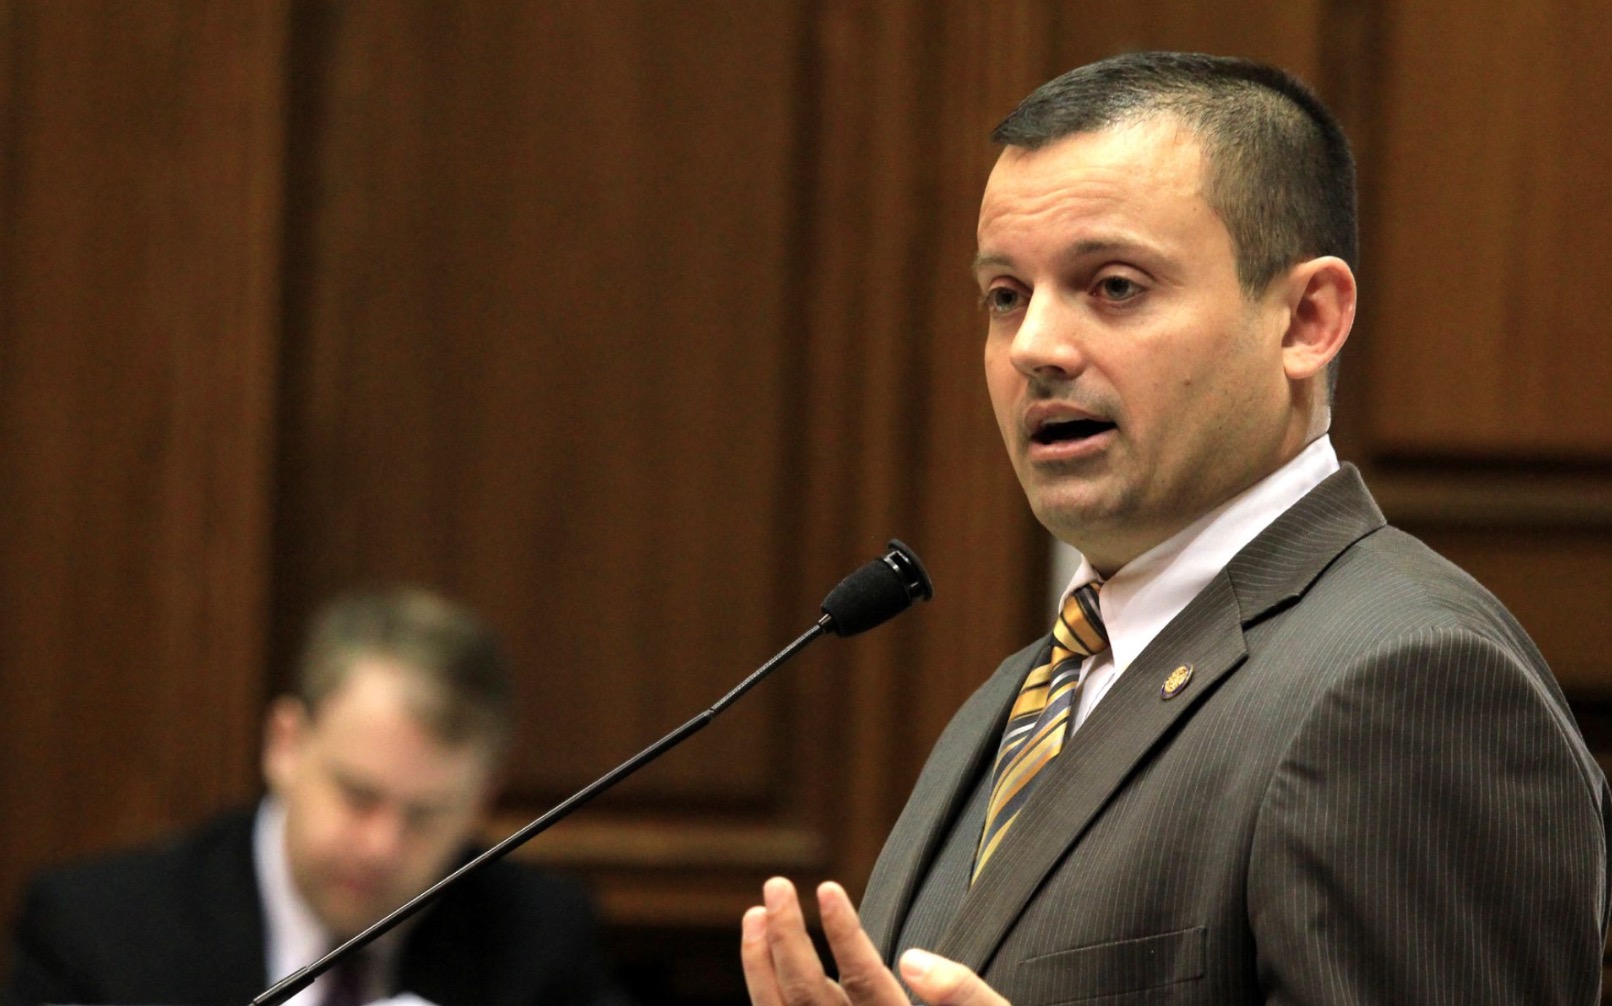 Rep. Jud McMillin, a rising star in Indiana's Republican Party, abruptly resigned Tuesday